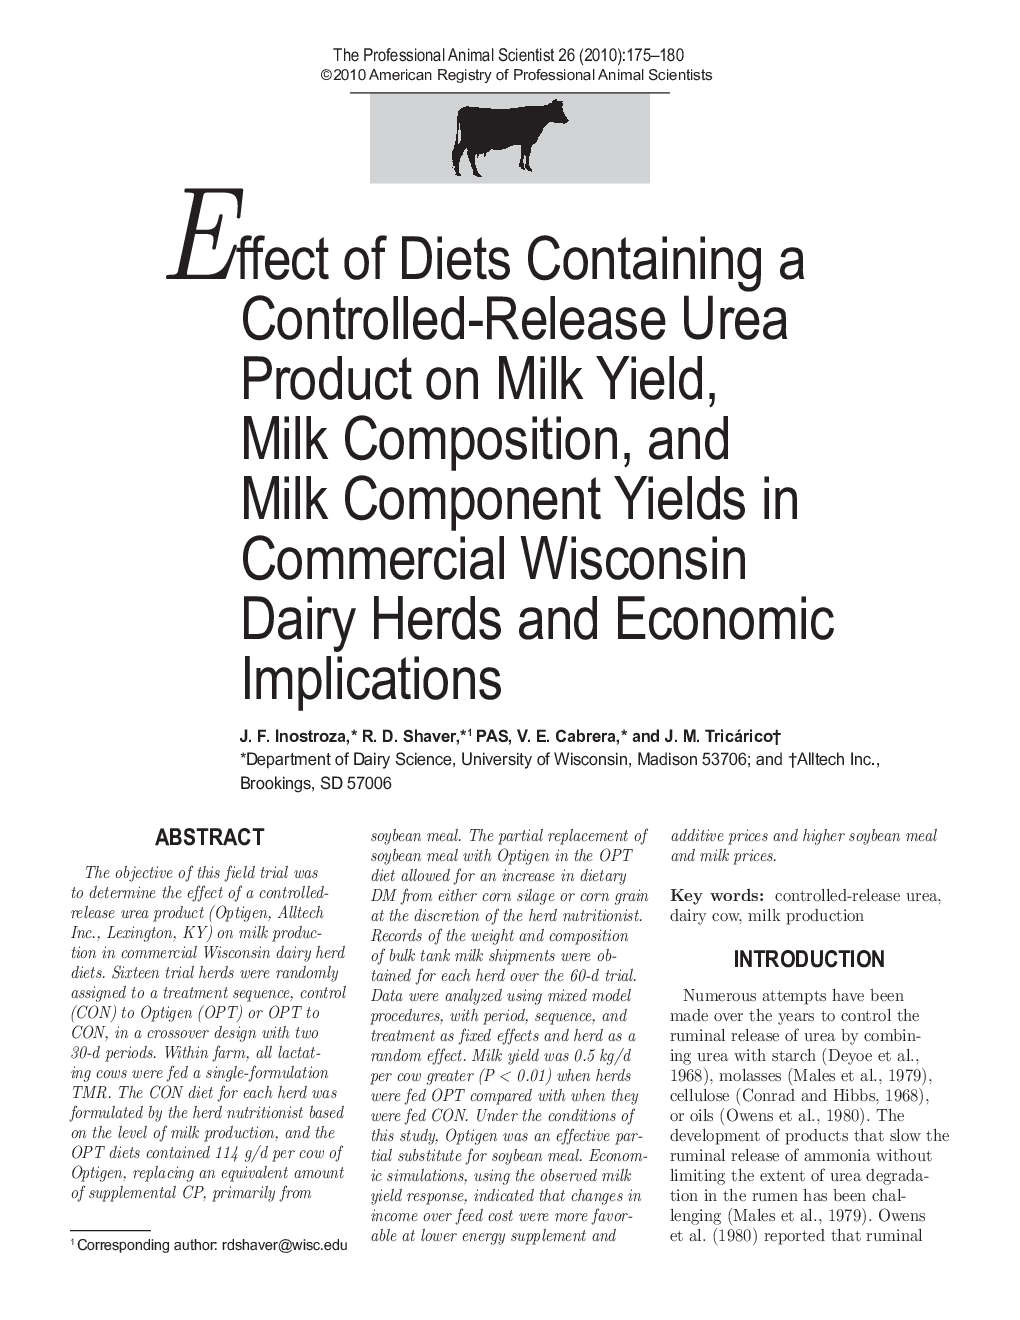 Effect of Diets Containing a Controlled-Release Urea Product on Milk Yield, Milk Composition, and Milk Component Yields in Commercial Wisconsin Dairy Herds and Economic Implications